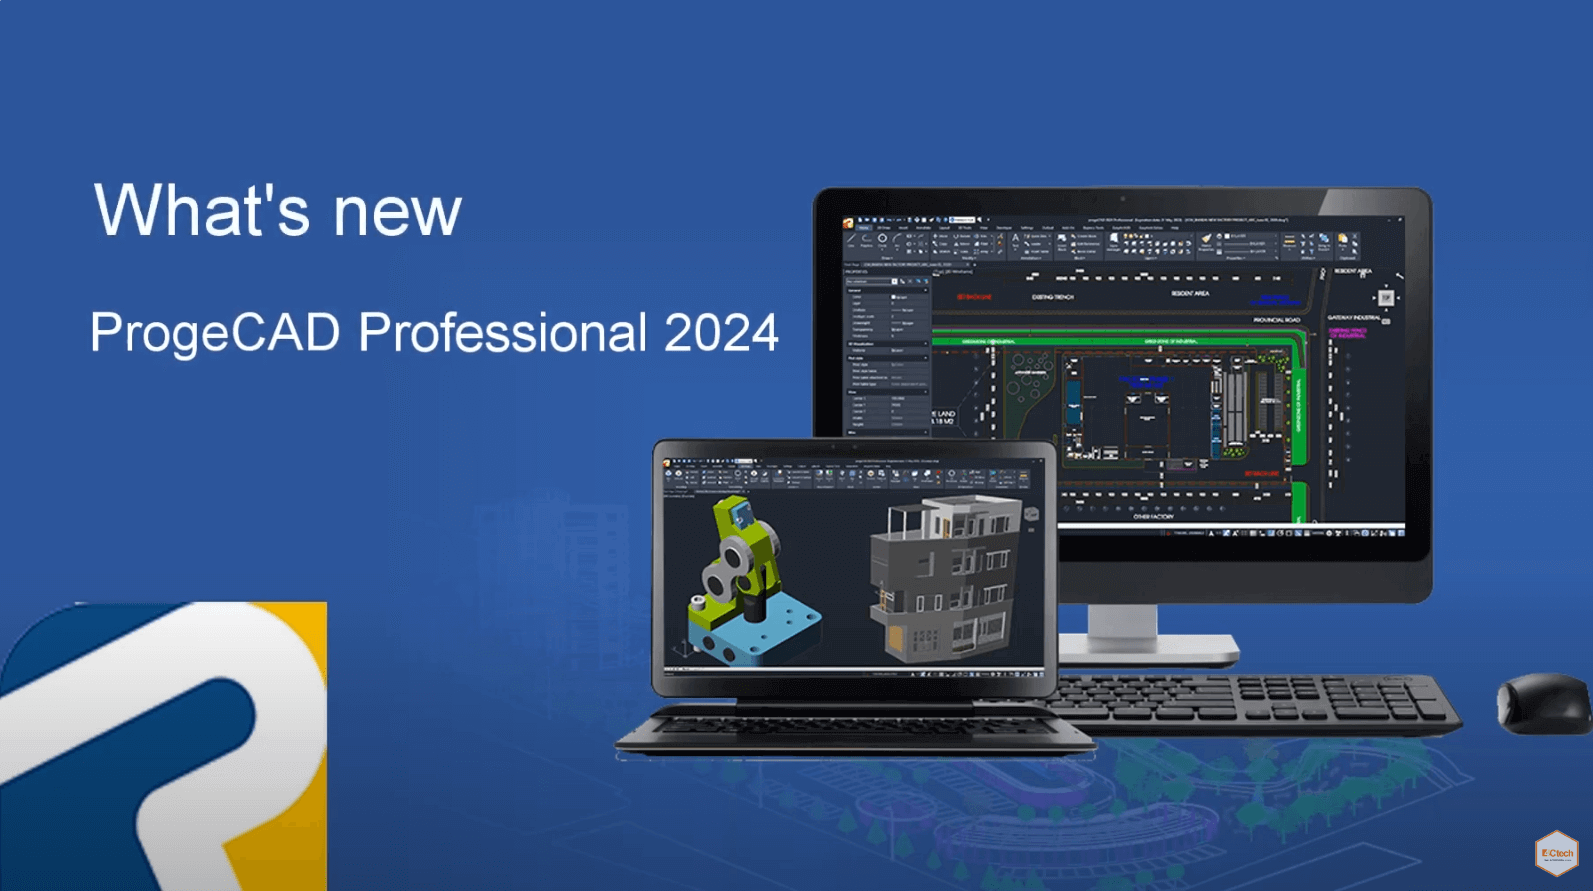 progeCAD Professional 2024: WHAT'S NEW? - The Long Story